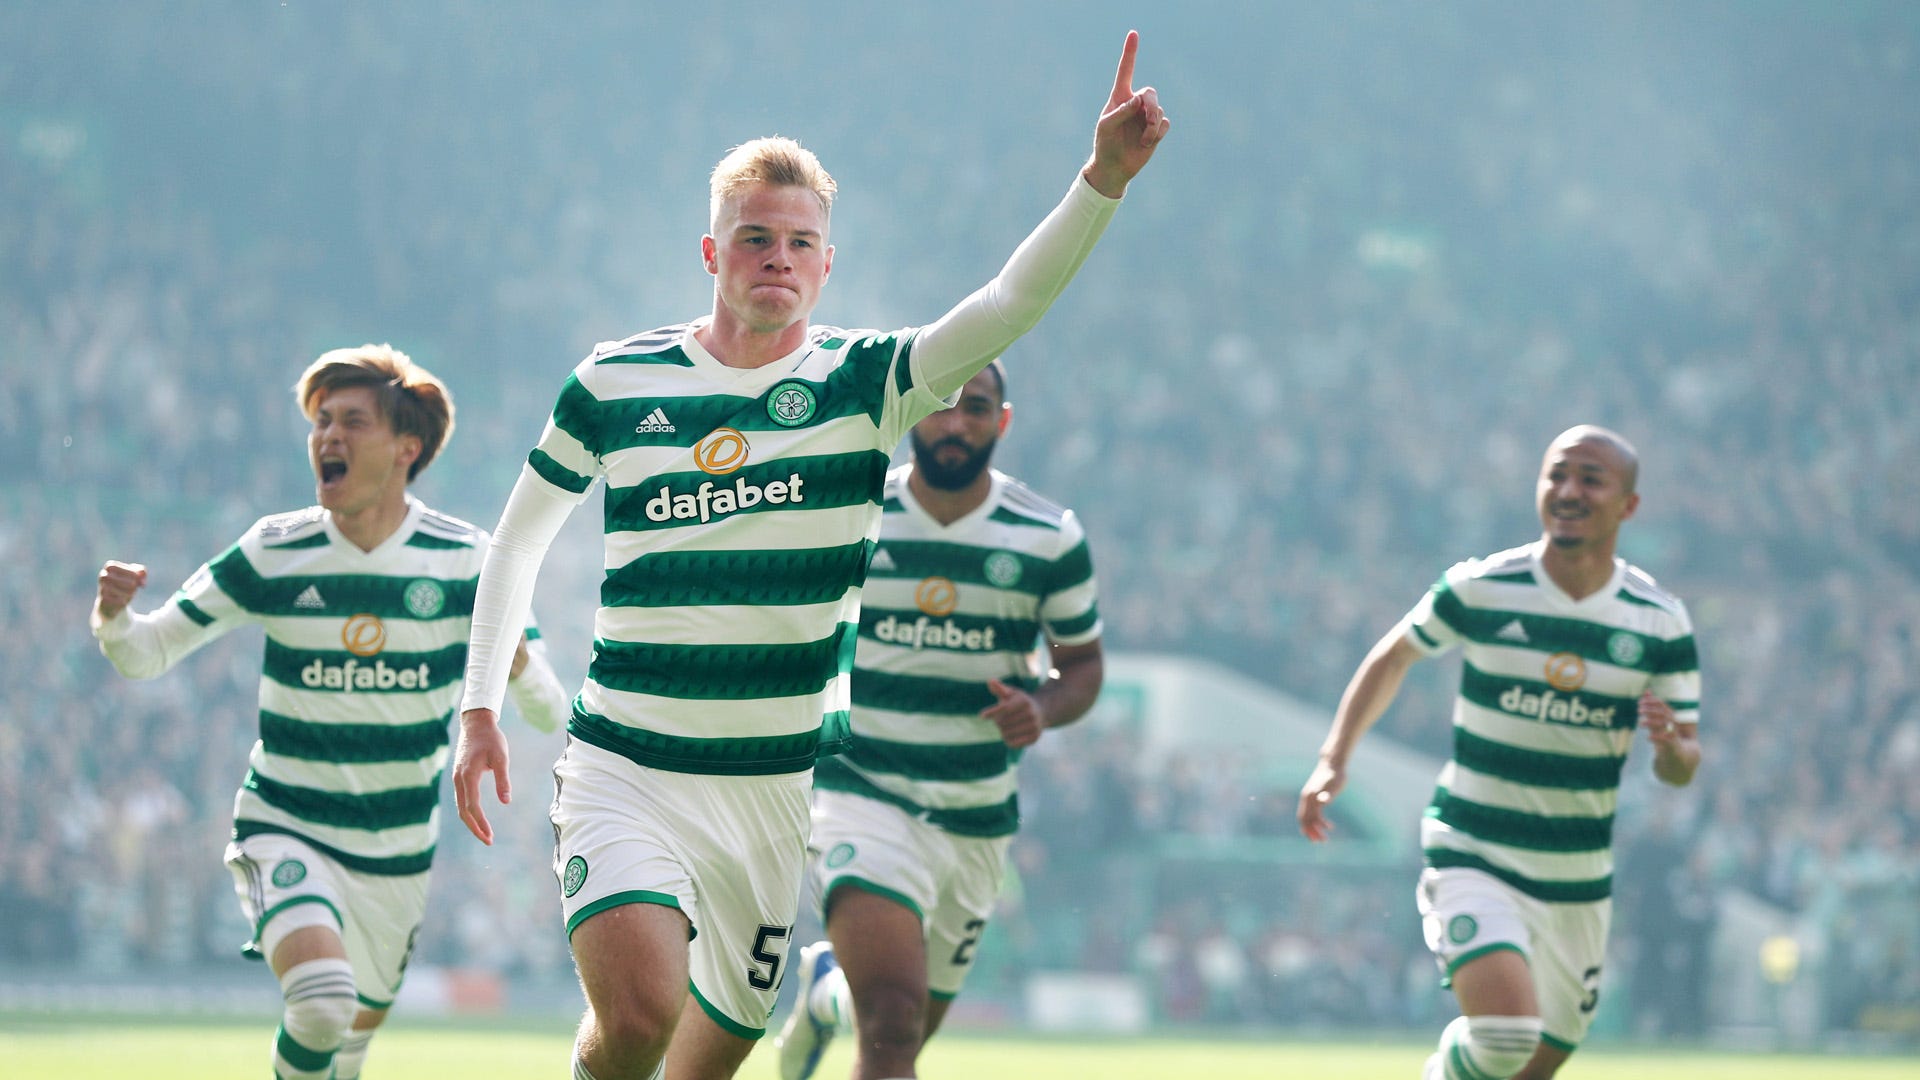 Ross County vs Celtic Live stream, TV channel, kick-off time and how to watch Goal UK